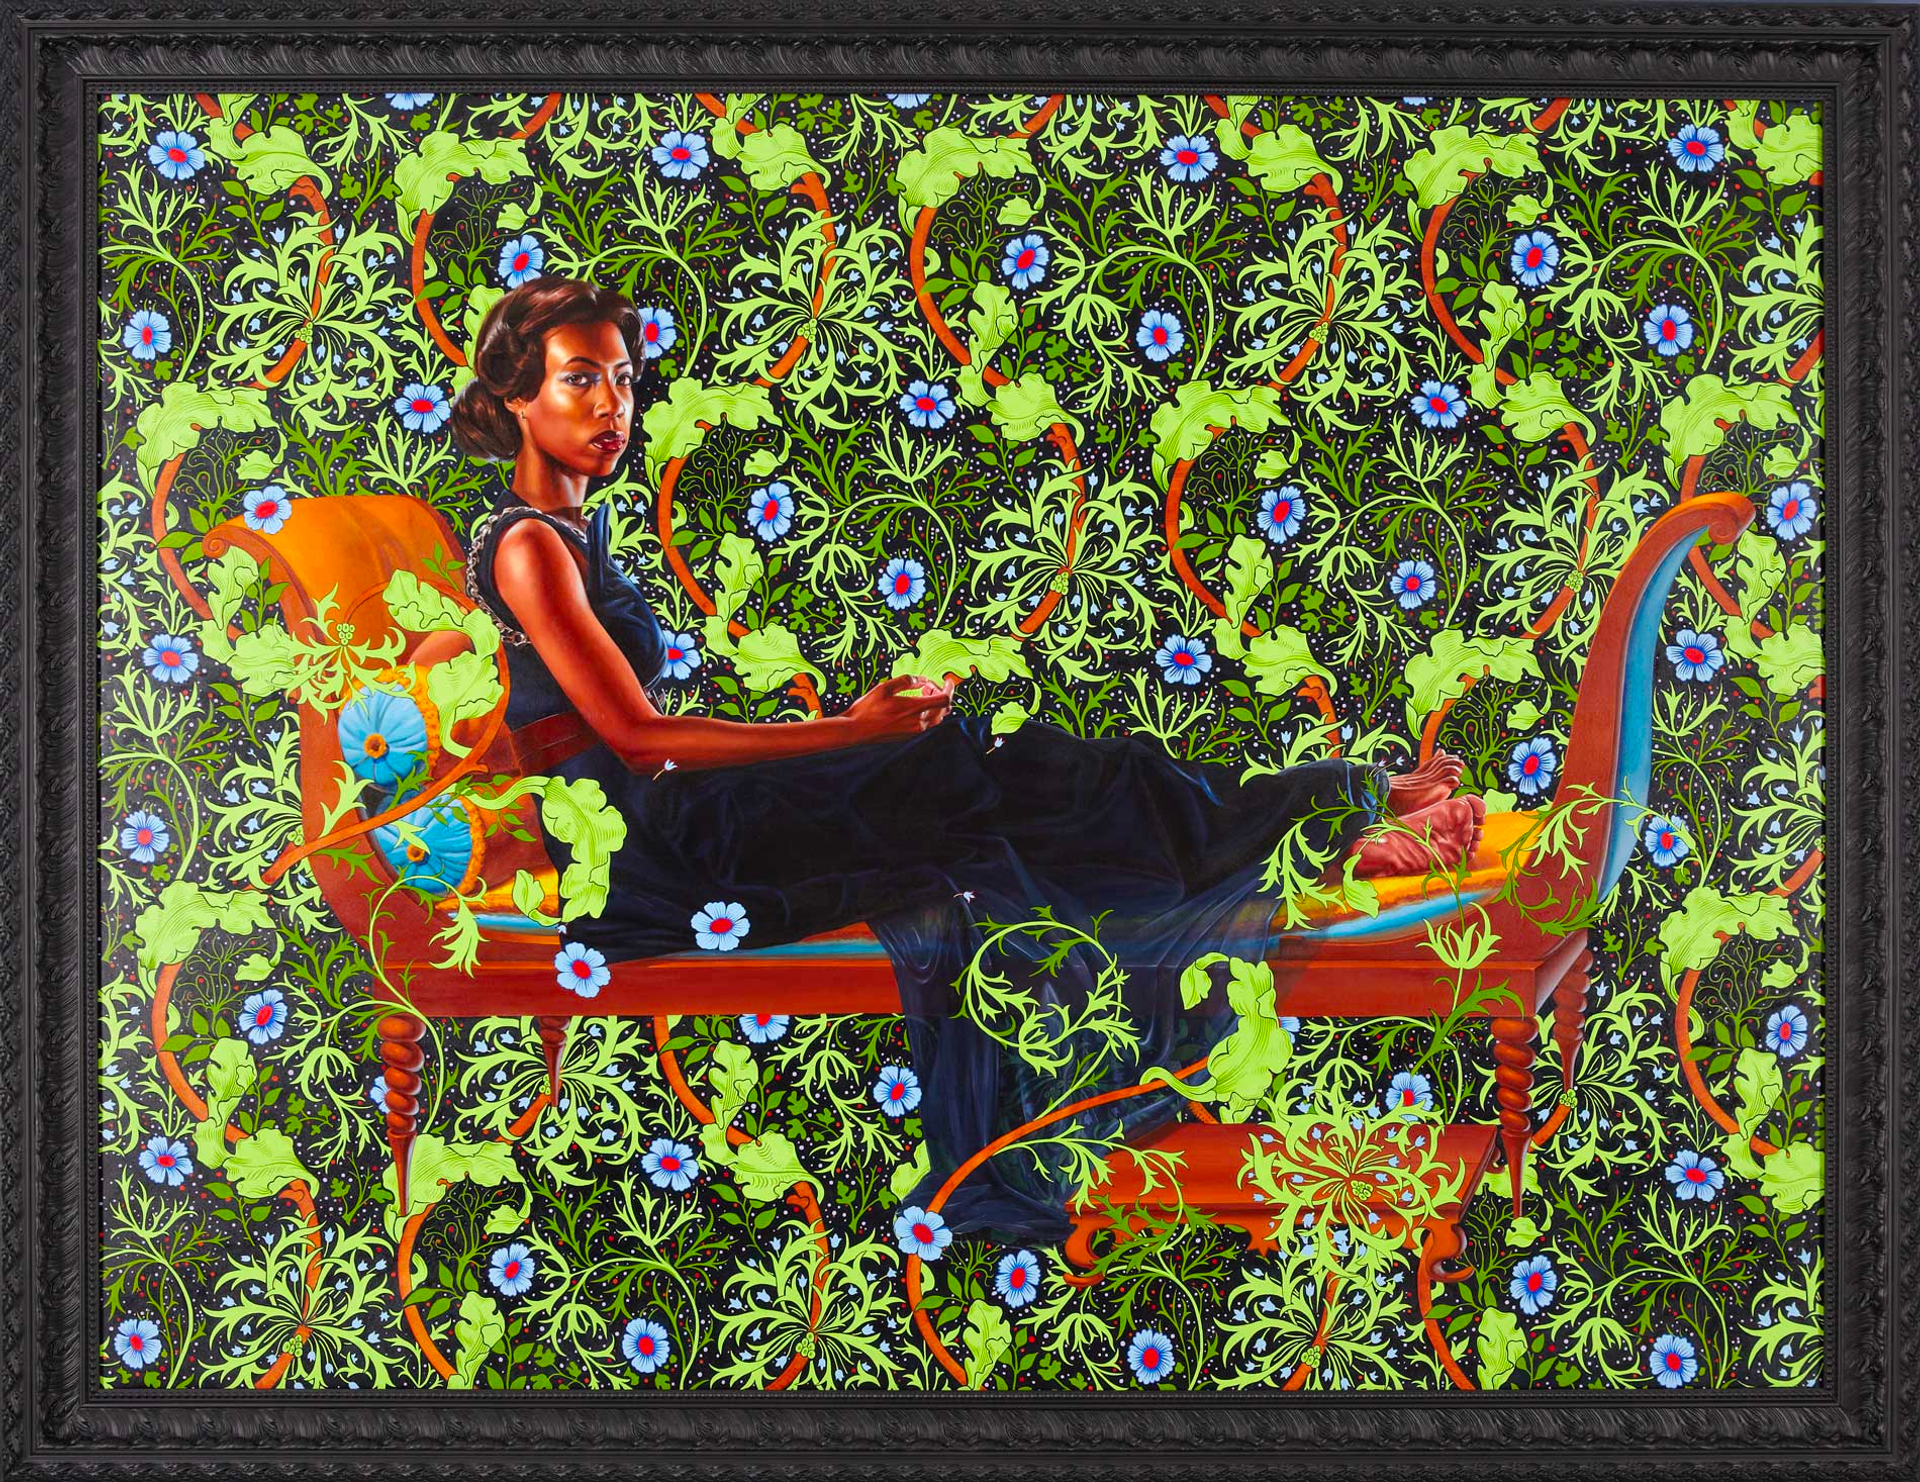 Reimagining Classical Art: A Deep Dive Into Kehinde Wiley's Groundbreaking Style